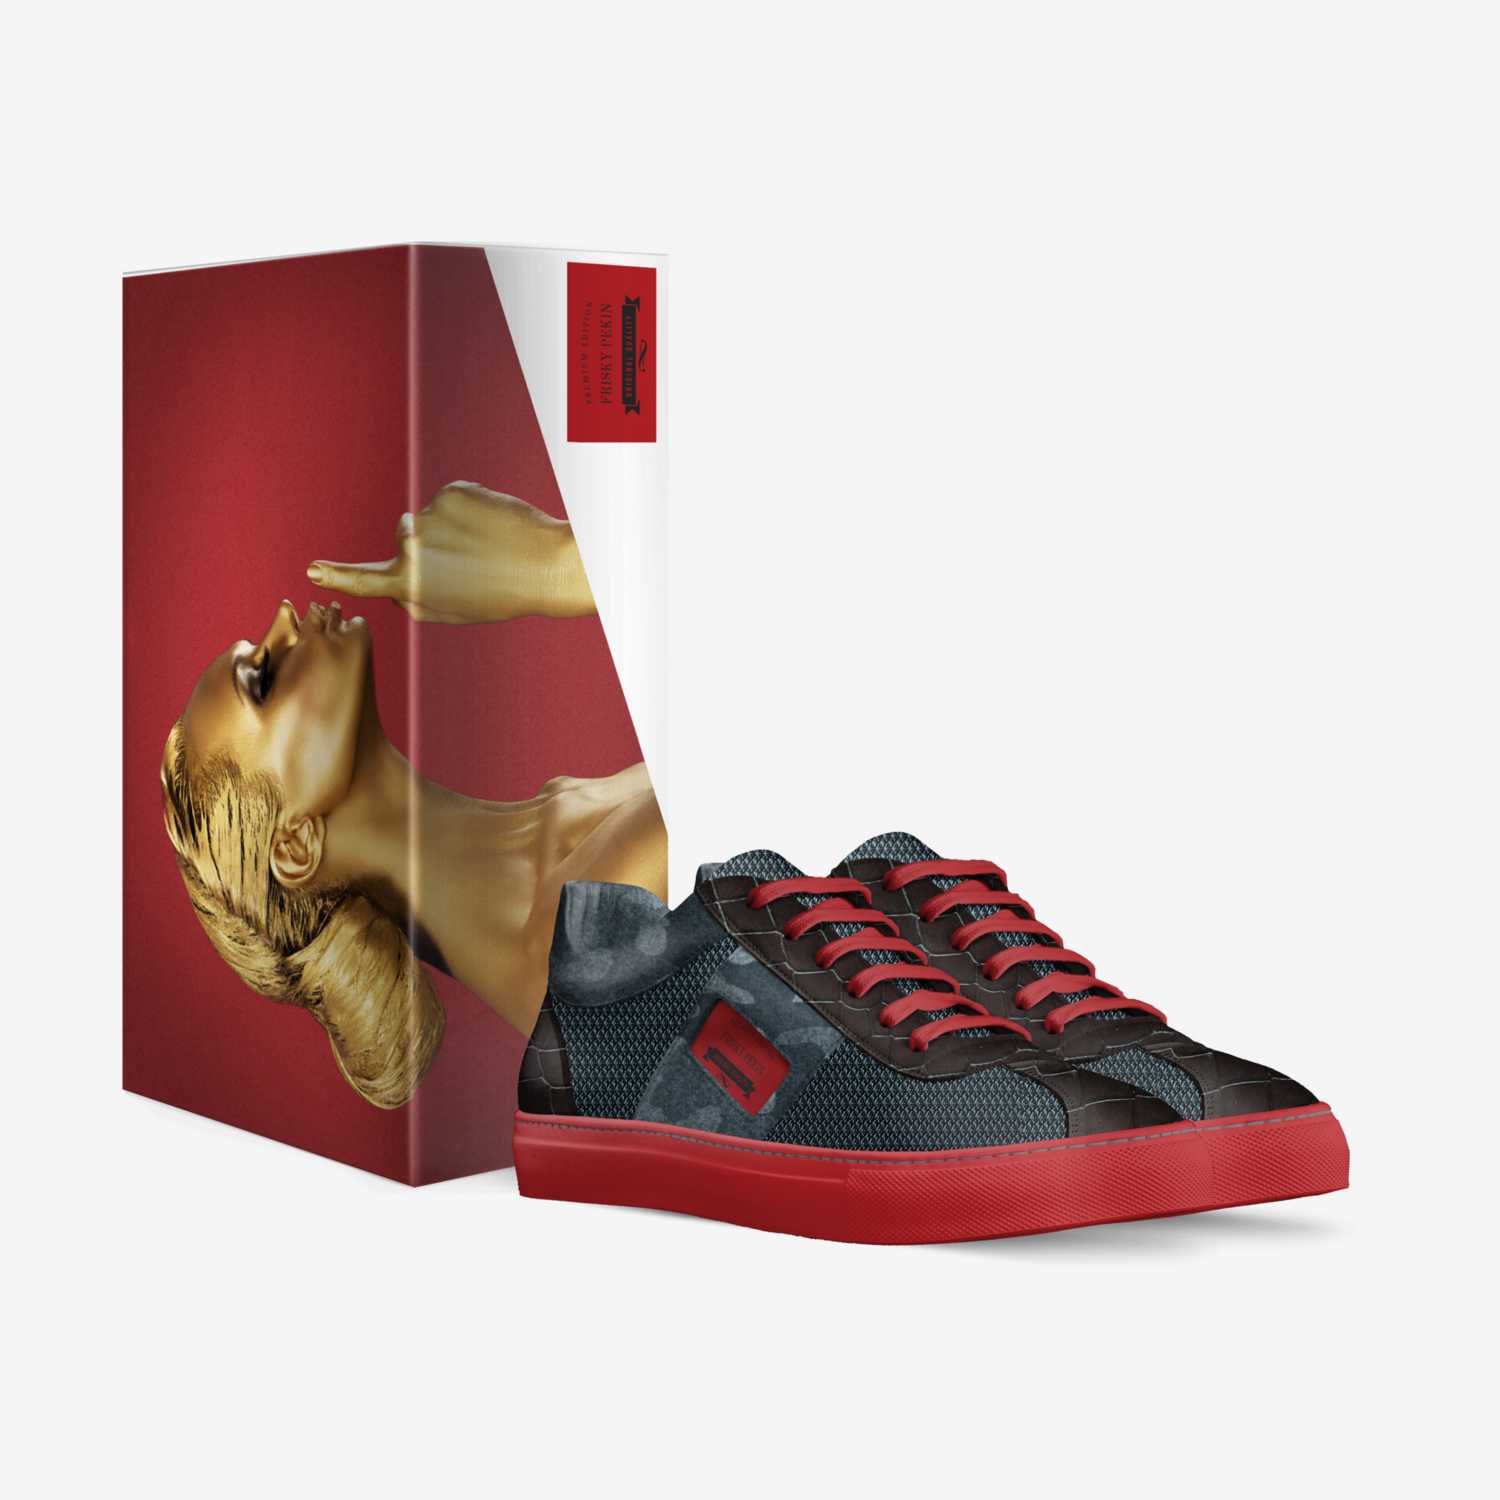 Frisky Pekin custom made in Italy shoes by Infamous Tk | Box view